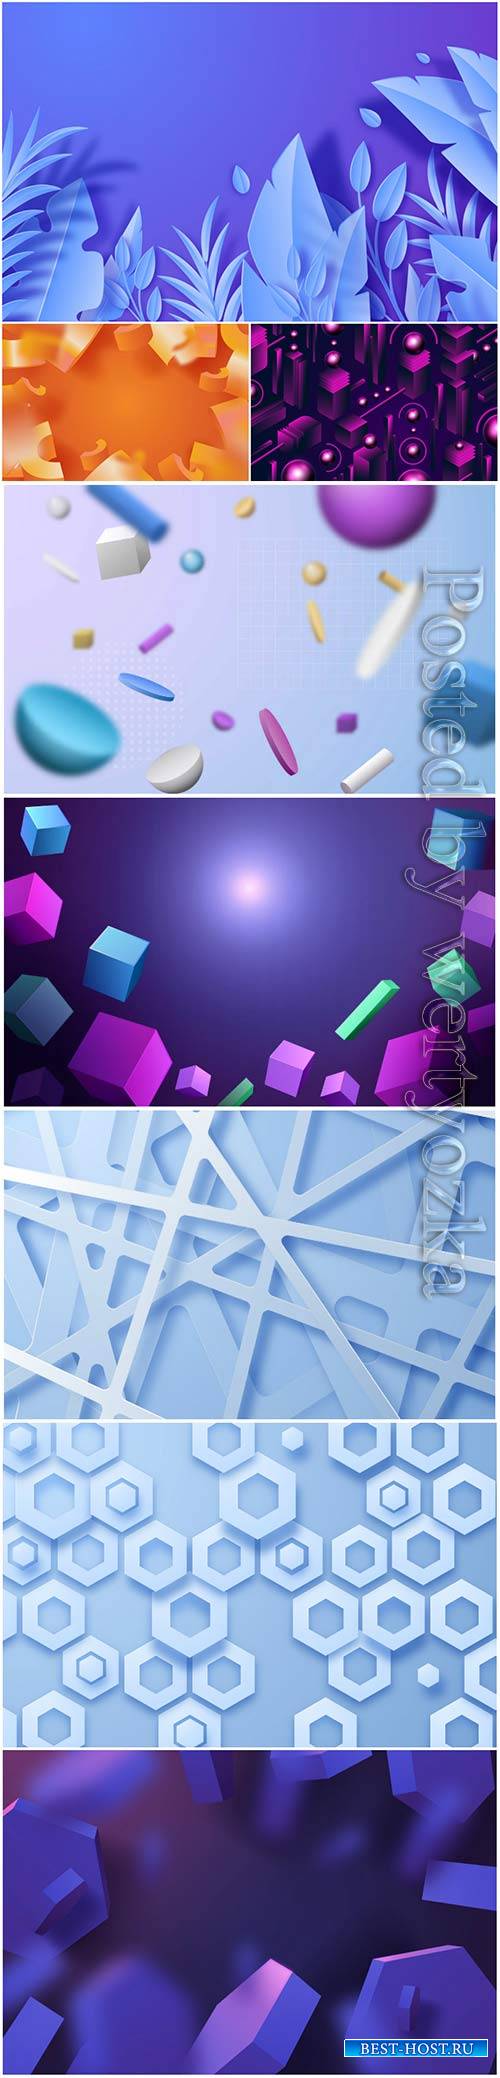 Abstract vector background, 3d models template # 4